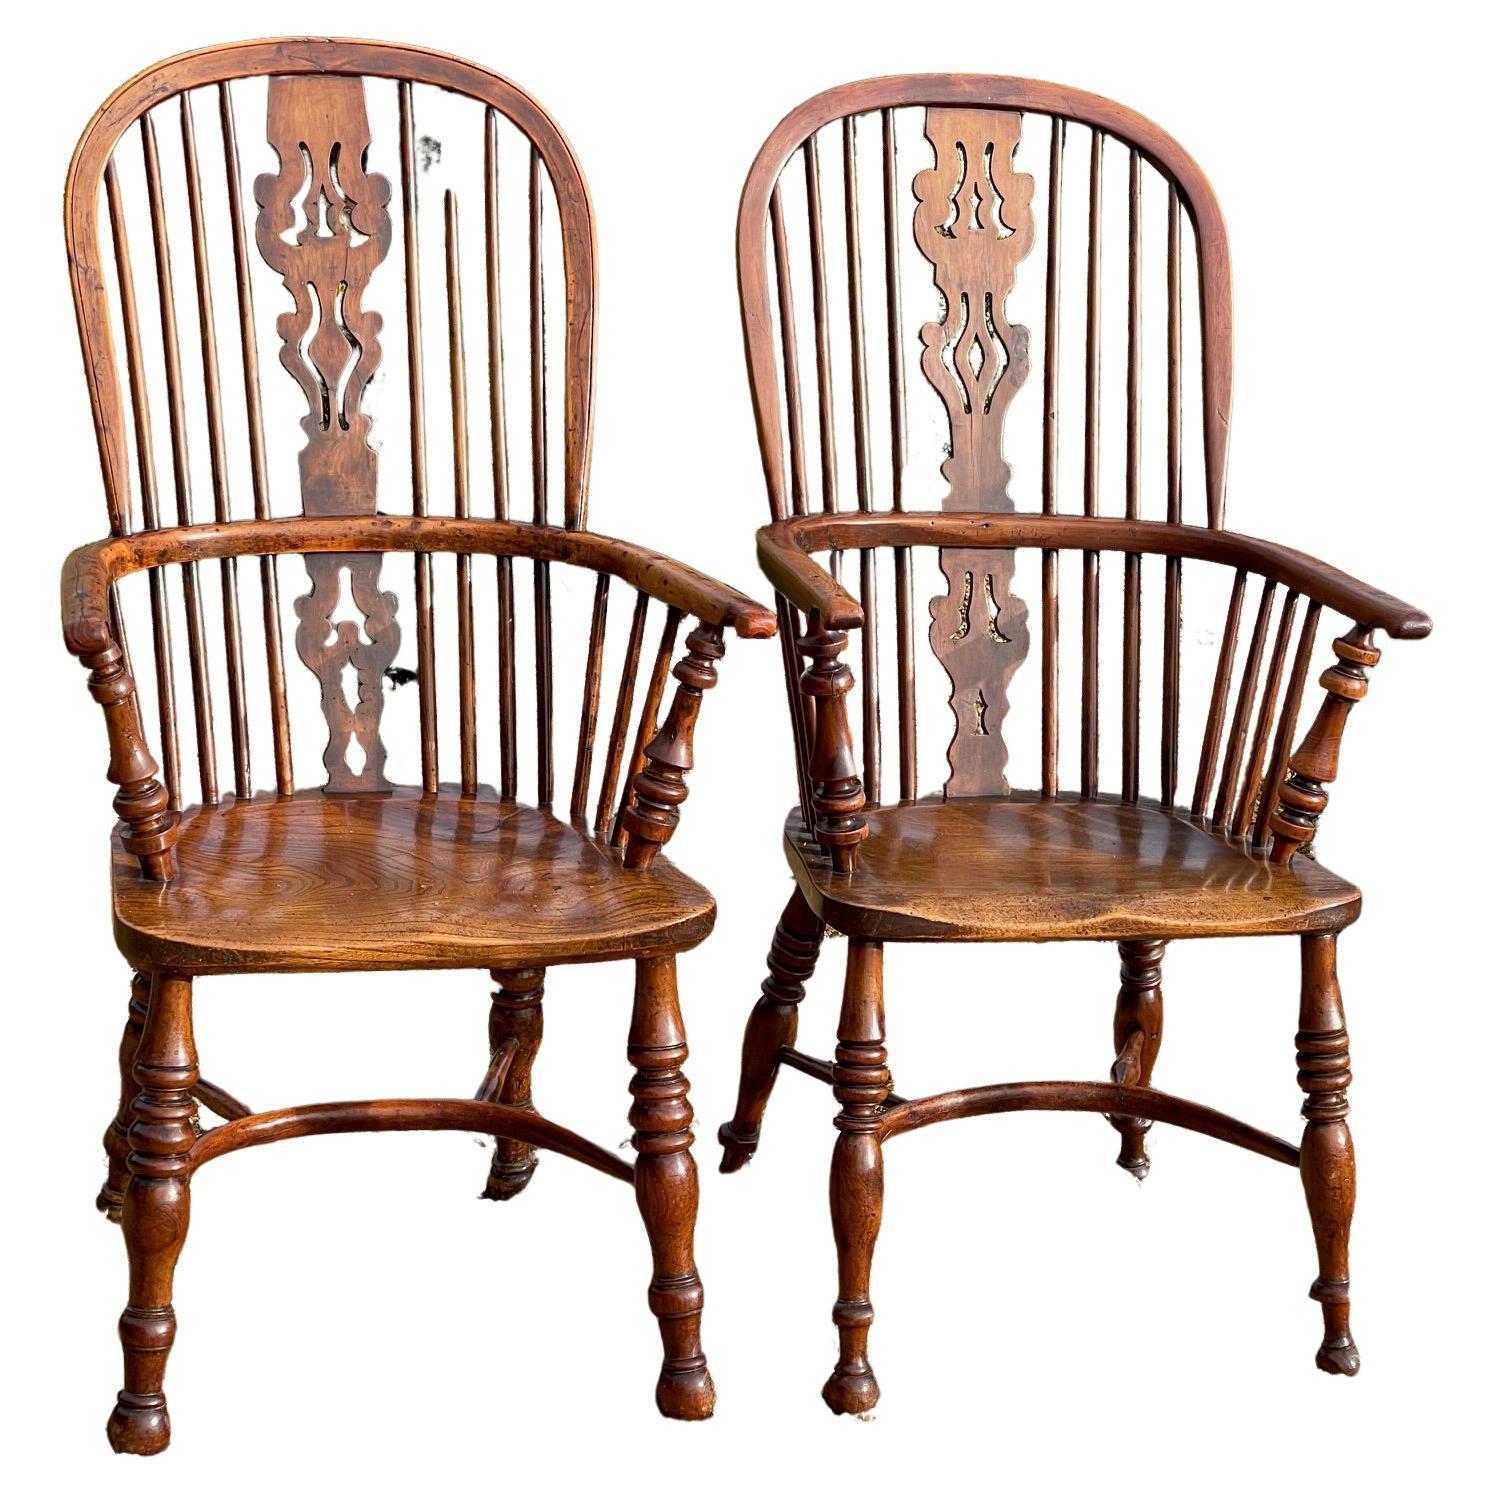 Near pair of yew wood Windsor chairs with crinoline stretchers For Sale